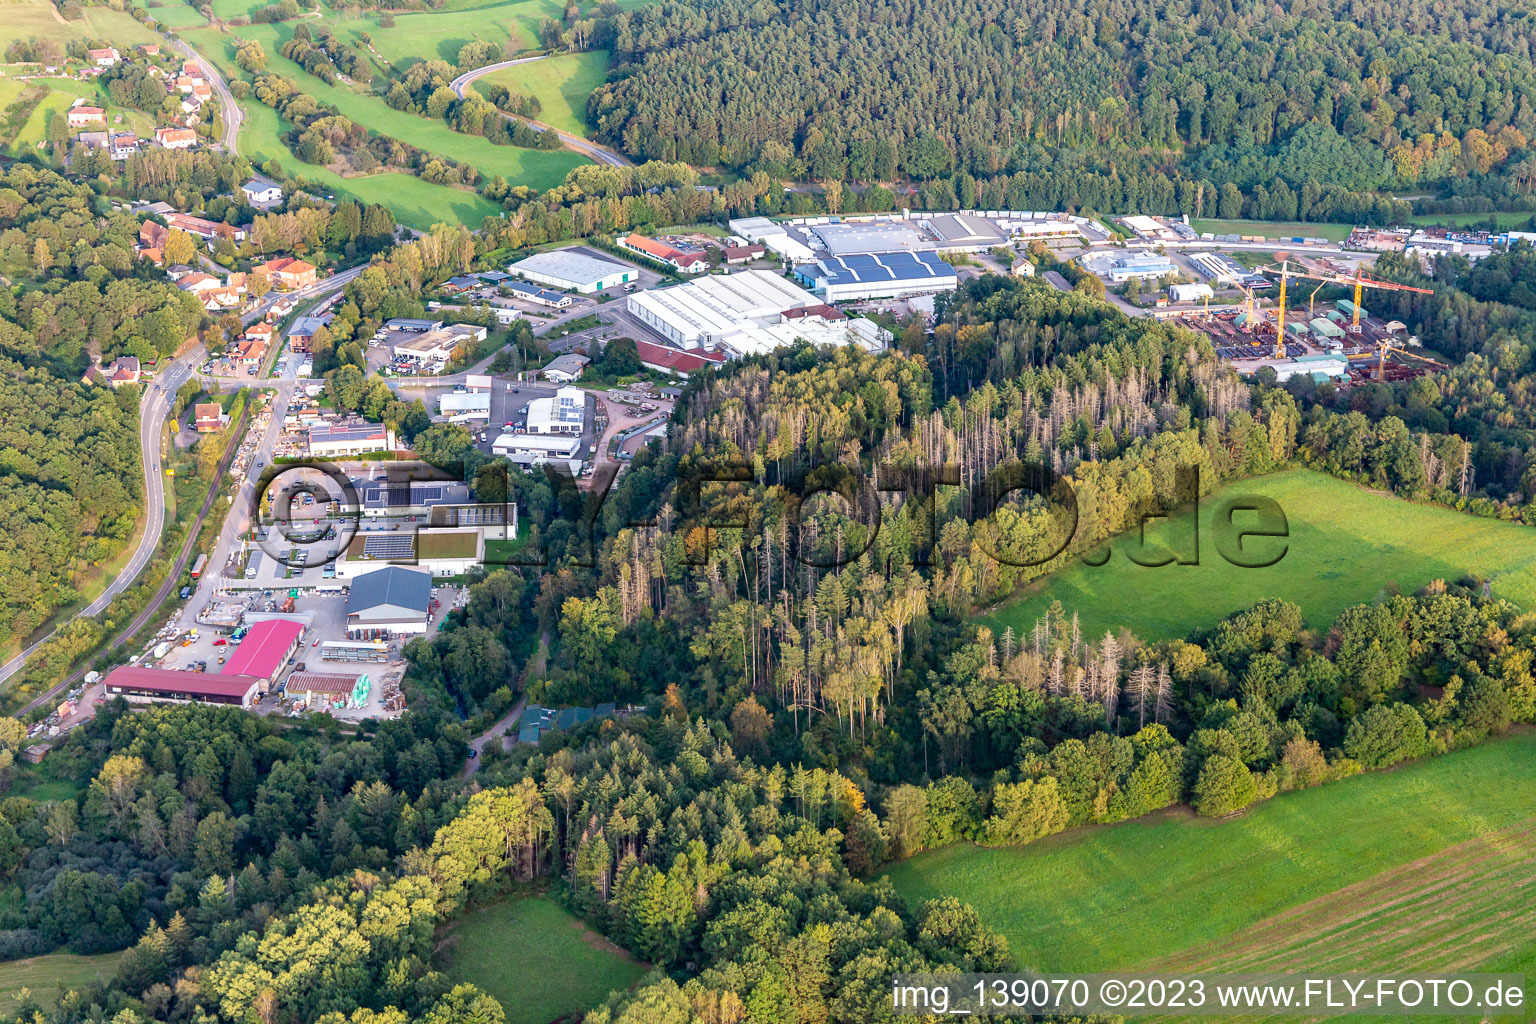 Reichenbach industrial area in Dahn in the state Rhineland-Palatinate, Germany